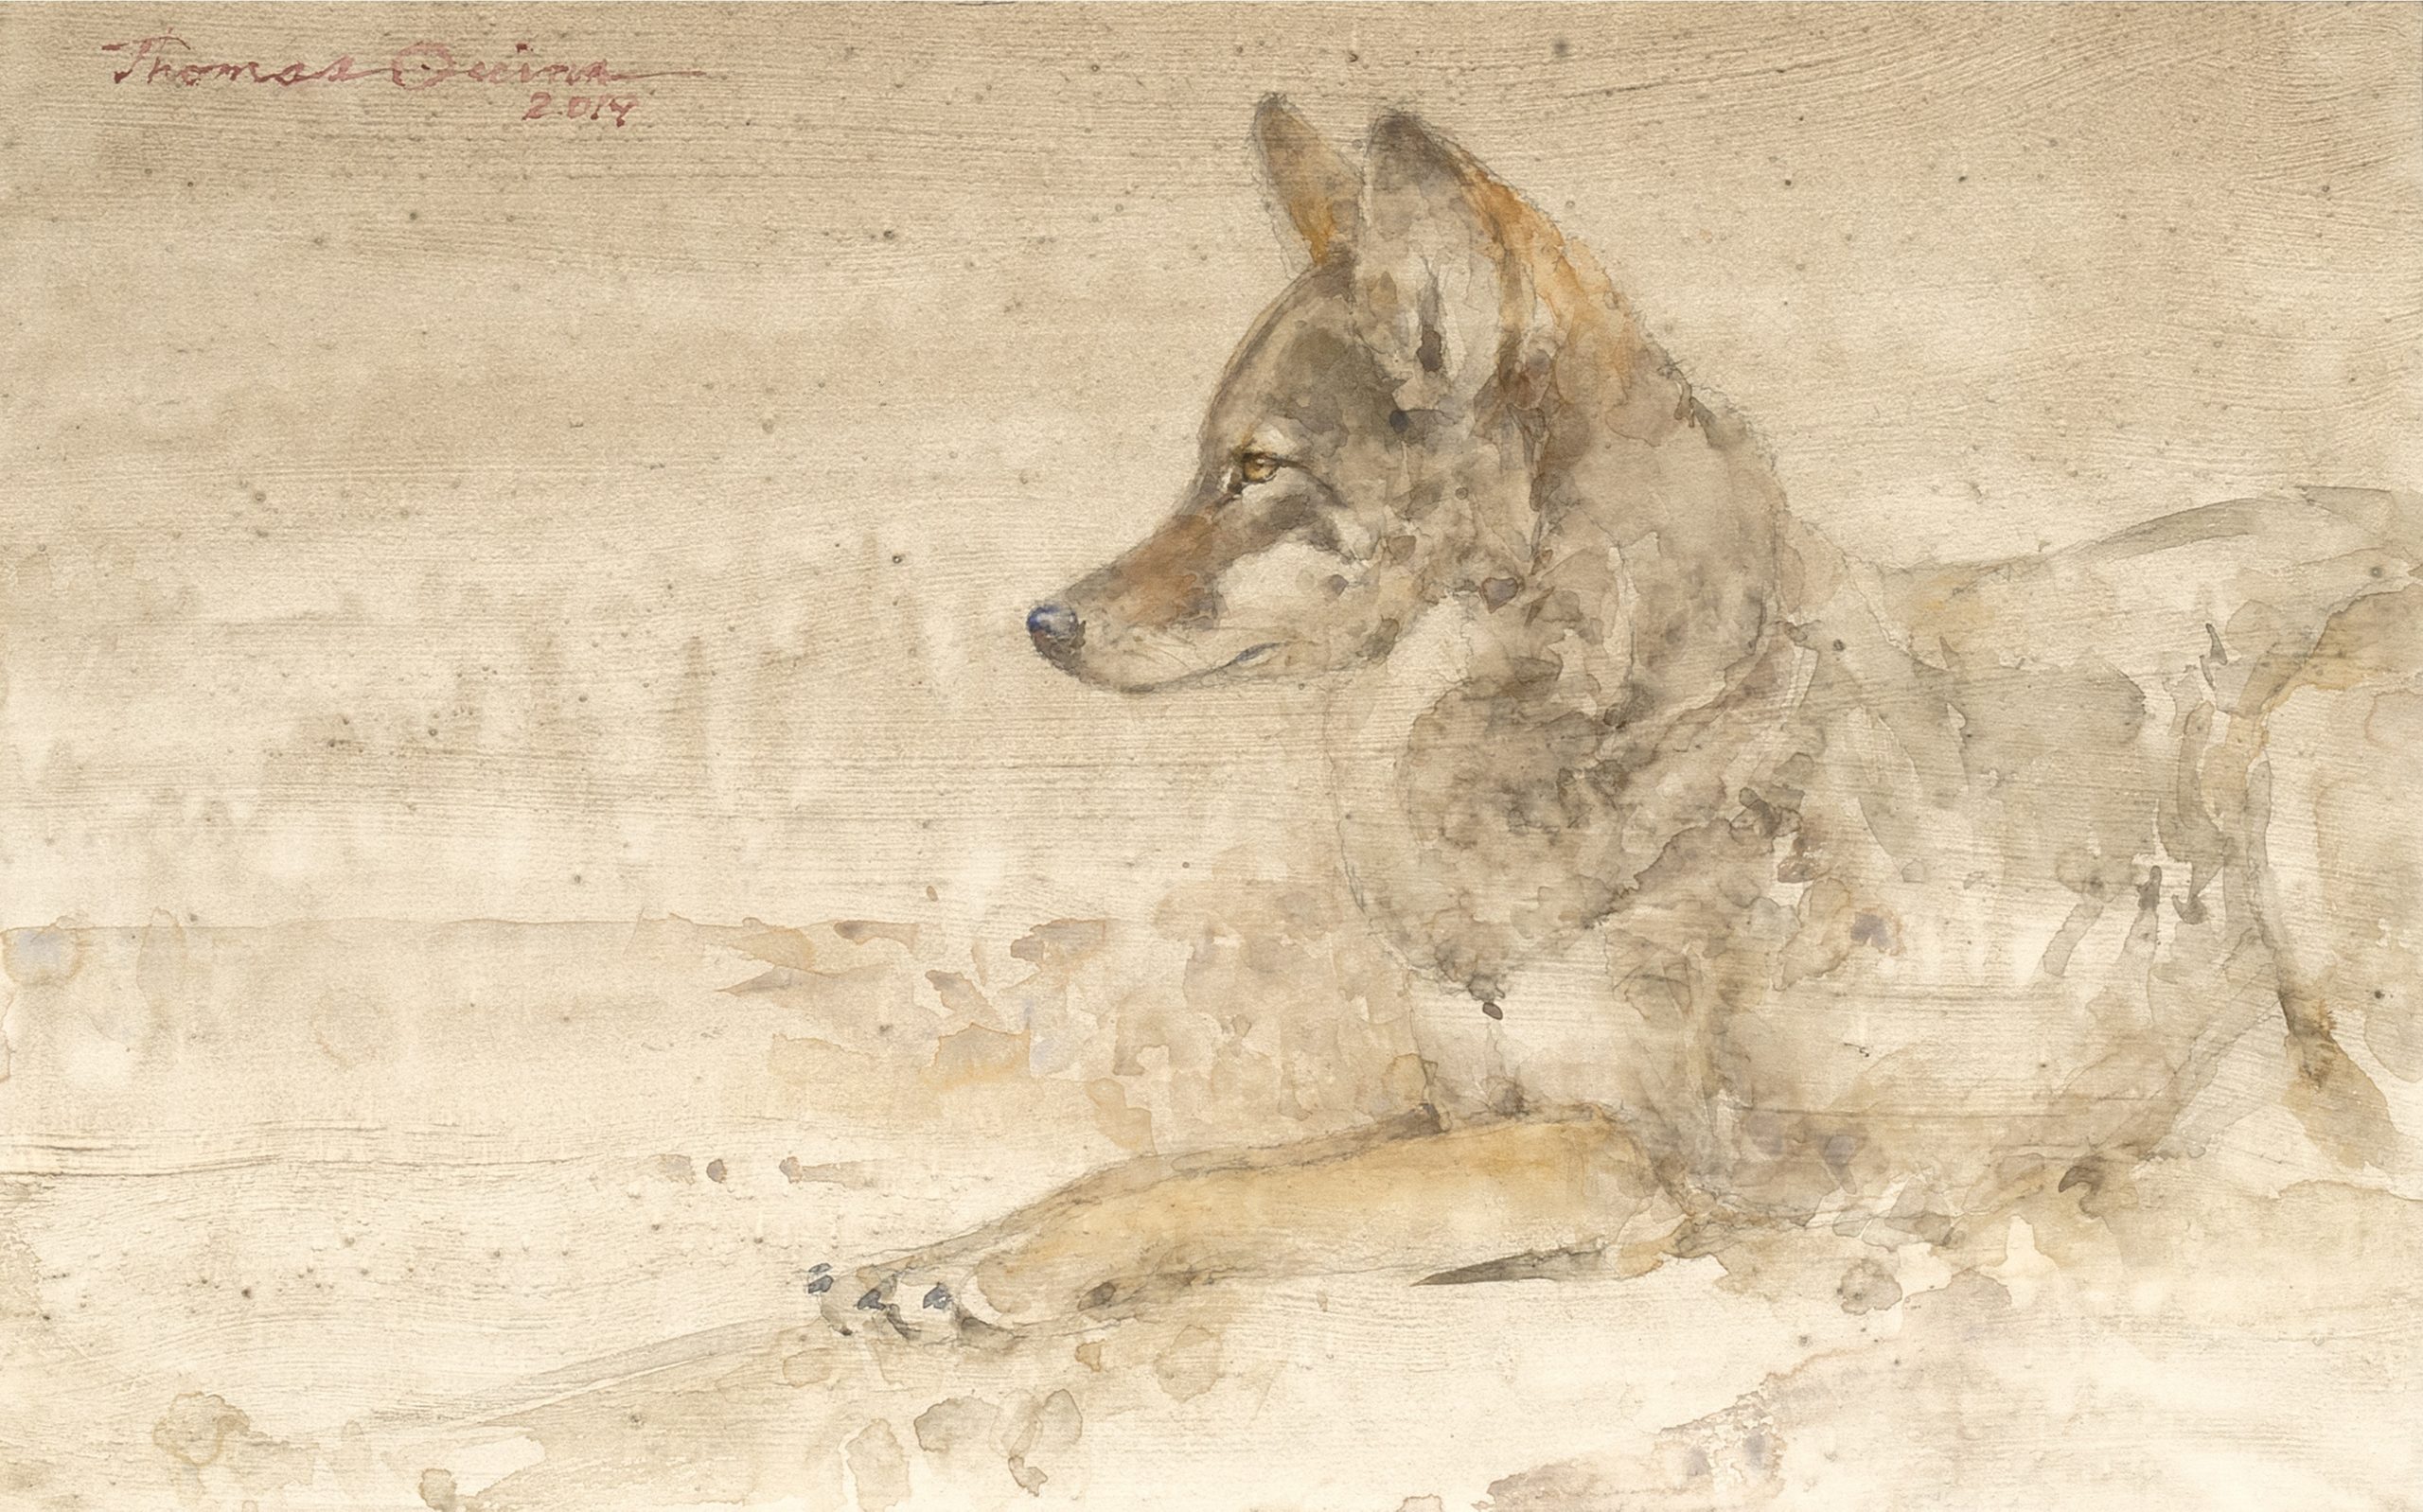 

											Tony Angell, Thomas Quinn</b>

											<em>
												Tony Angell and Thomas Quinn:  A Conversation with Nature</em> 

											<h4>
												September 25 - November 28, 2020											</h4>

		                																																<i>Sepia Afternoon,</i>  
																																																					watercolor on paper, 
																																								11 1/4 x 18 1/4 inches 
																								
		                				